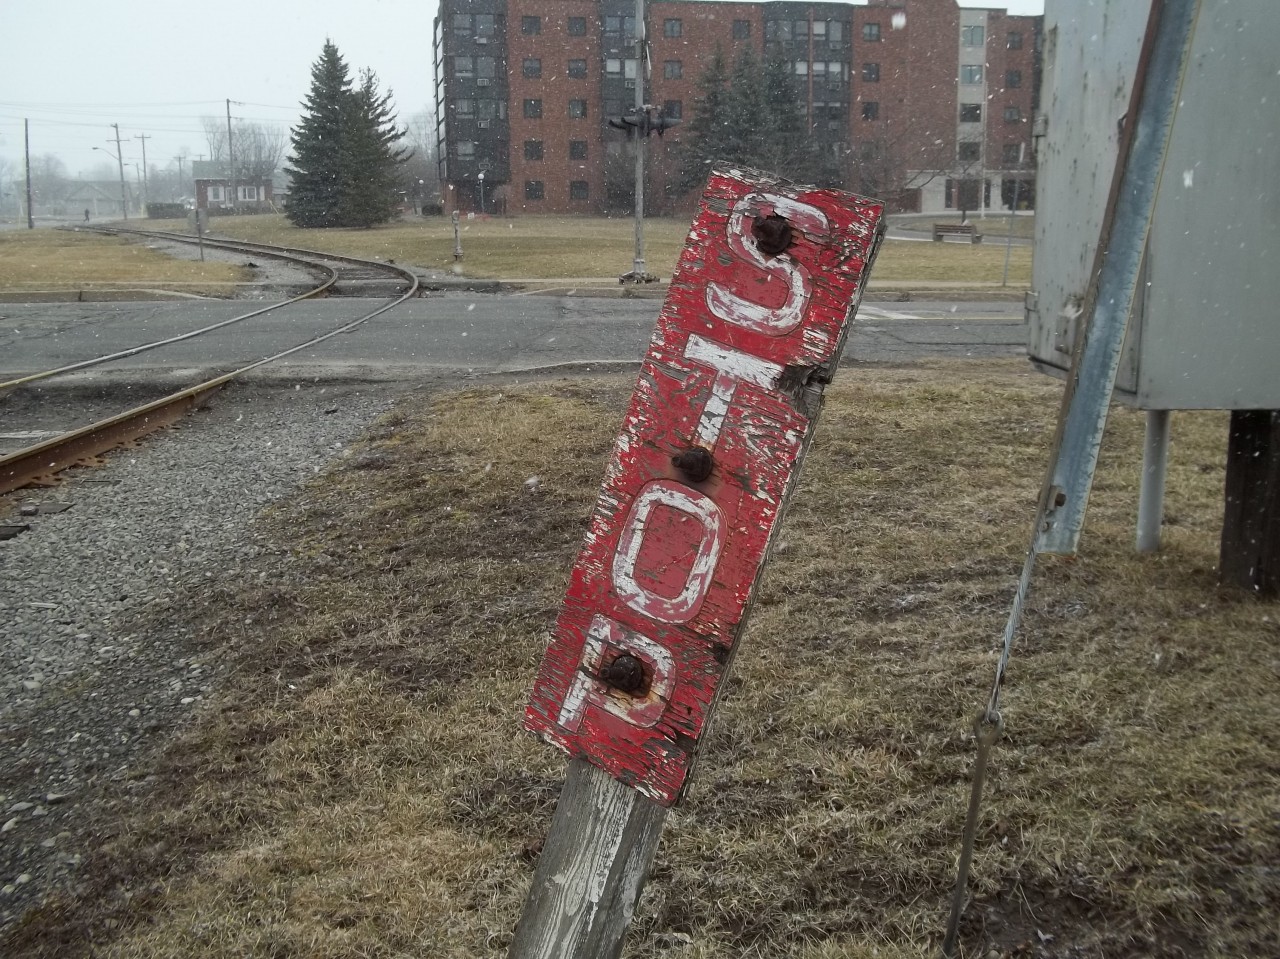 Sometimes little gems are hidden along tracks that you don't realise. Along the Fonthill spur, there use to be an old fashioned wooden stop sign. Stop signs along rails are odd enough, but rarely you see one like this. Sometime during 2014 this was removed and replaced with a regular stop sign.